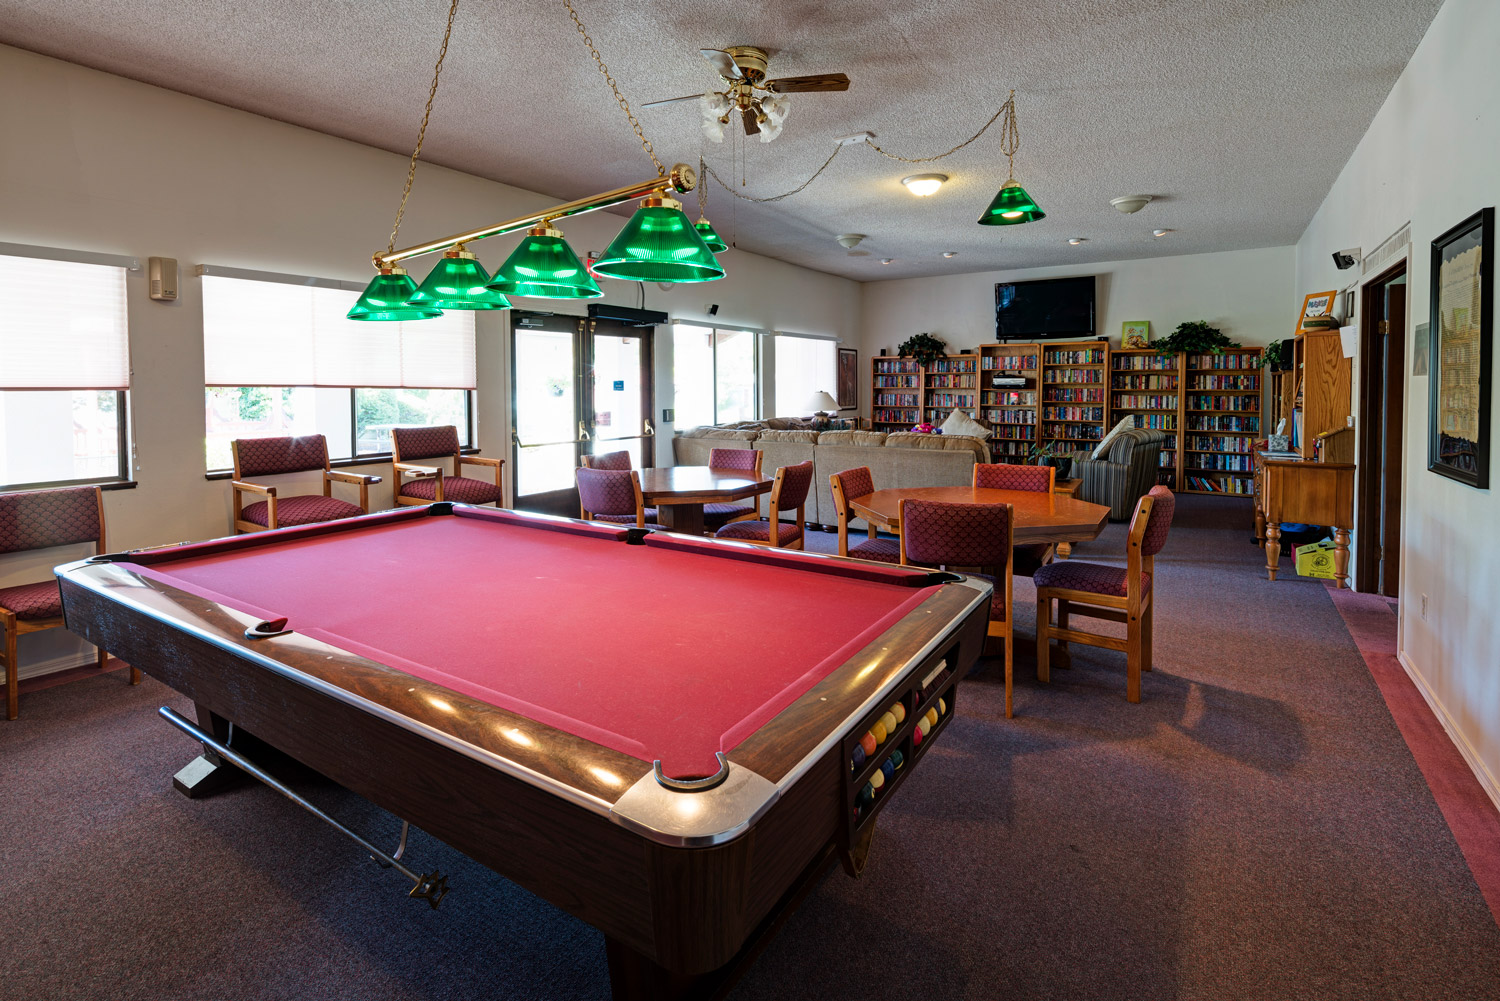 Game room with a pool table and couple tables with chairs to play cards.